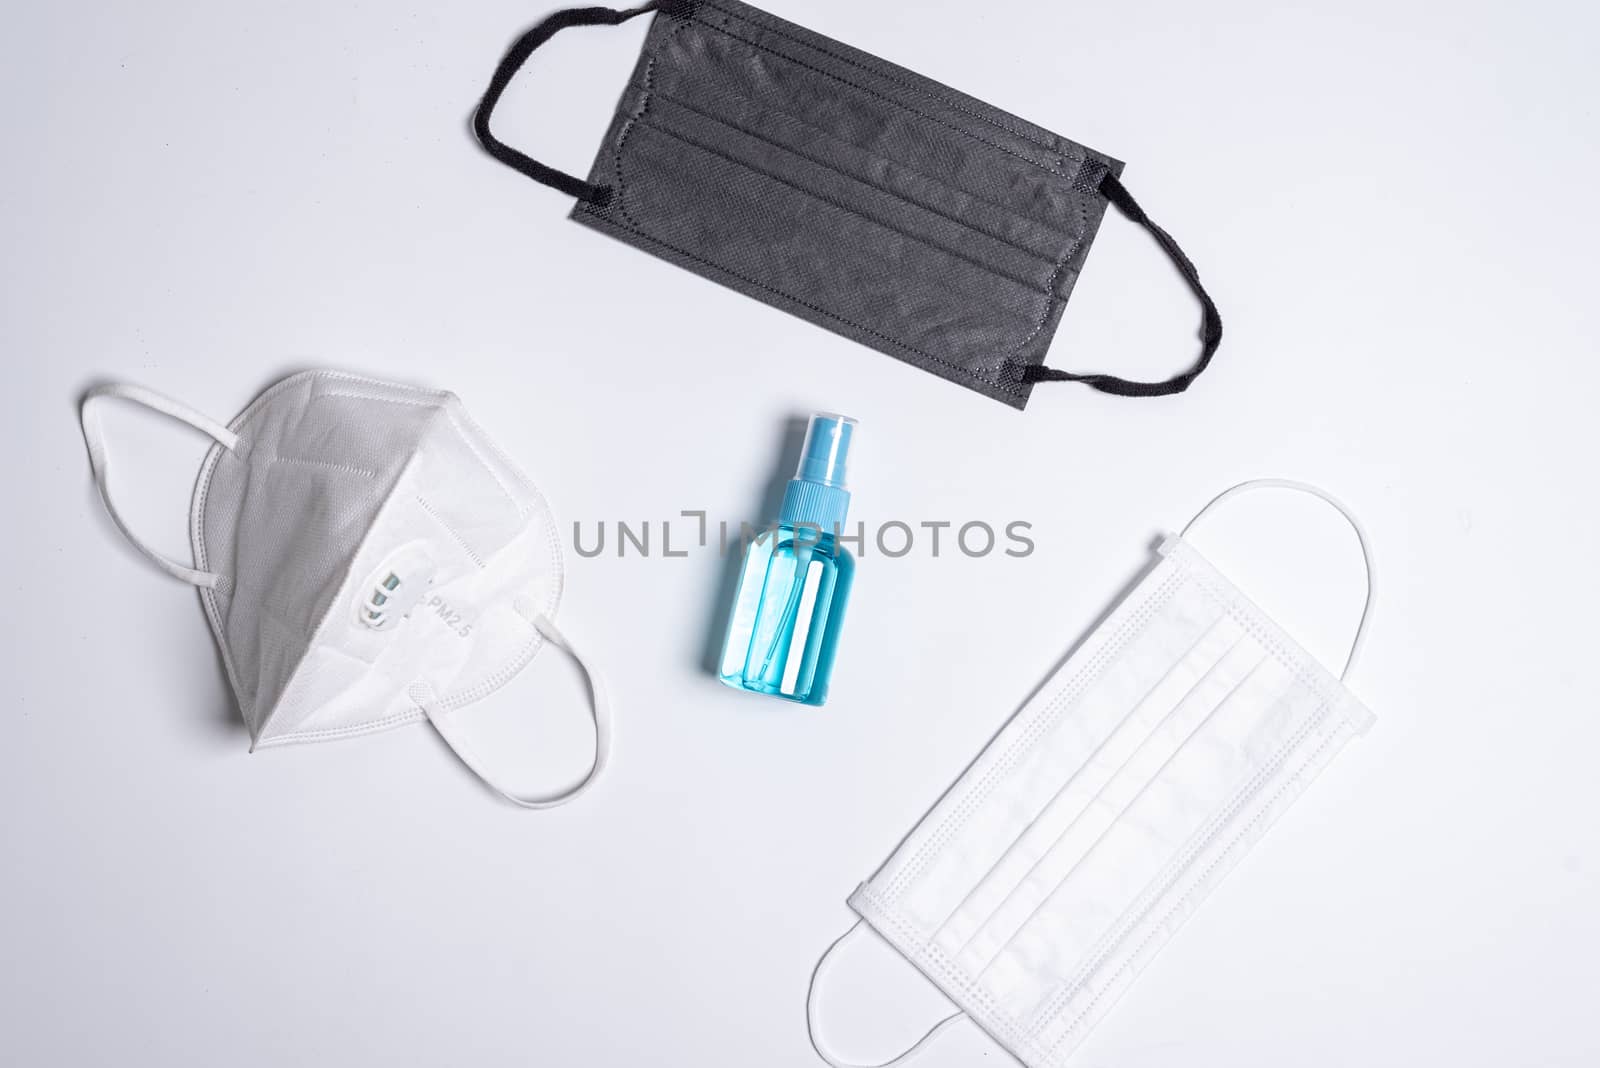 The equipment to protect COVID-19, multi color mask and hand cleaner gel with Isolated on white background concept.